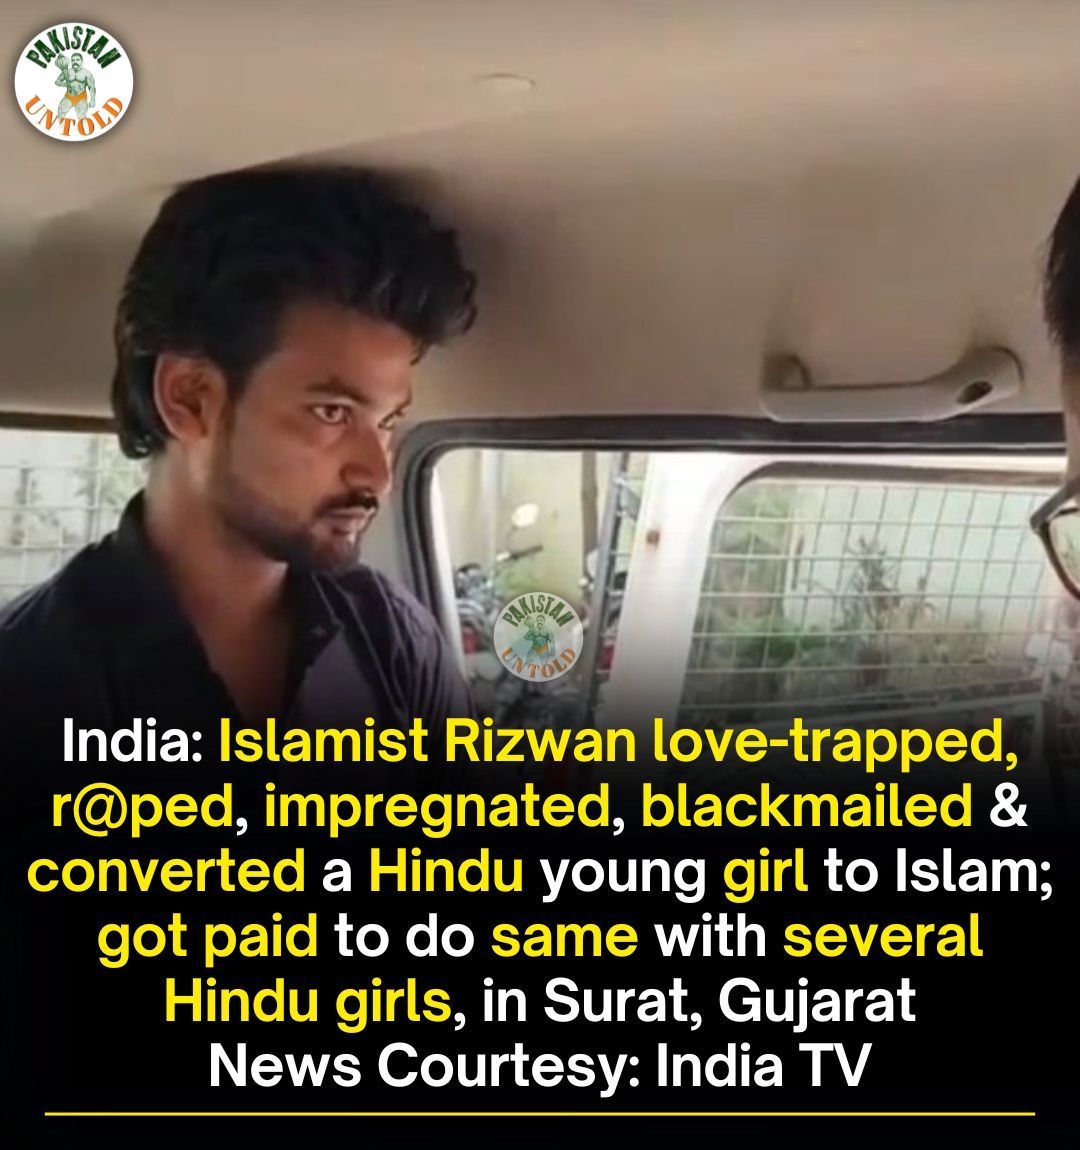 Many Hindu girls trapped, r@ped, impregnated, blackmailed & converted to Islam by Rizwan.

Womb capture of Hindu women (womb j!haad) being executed with precision and purpose.